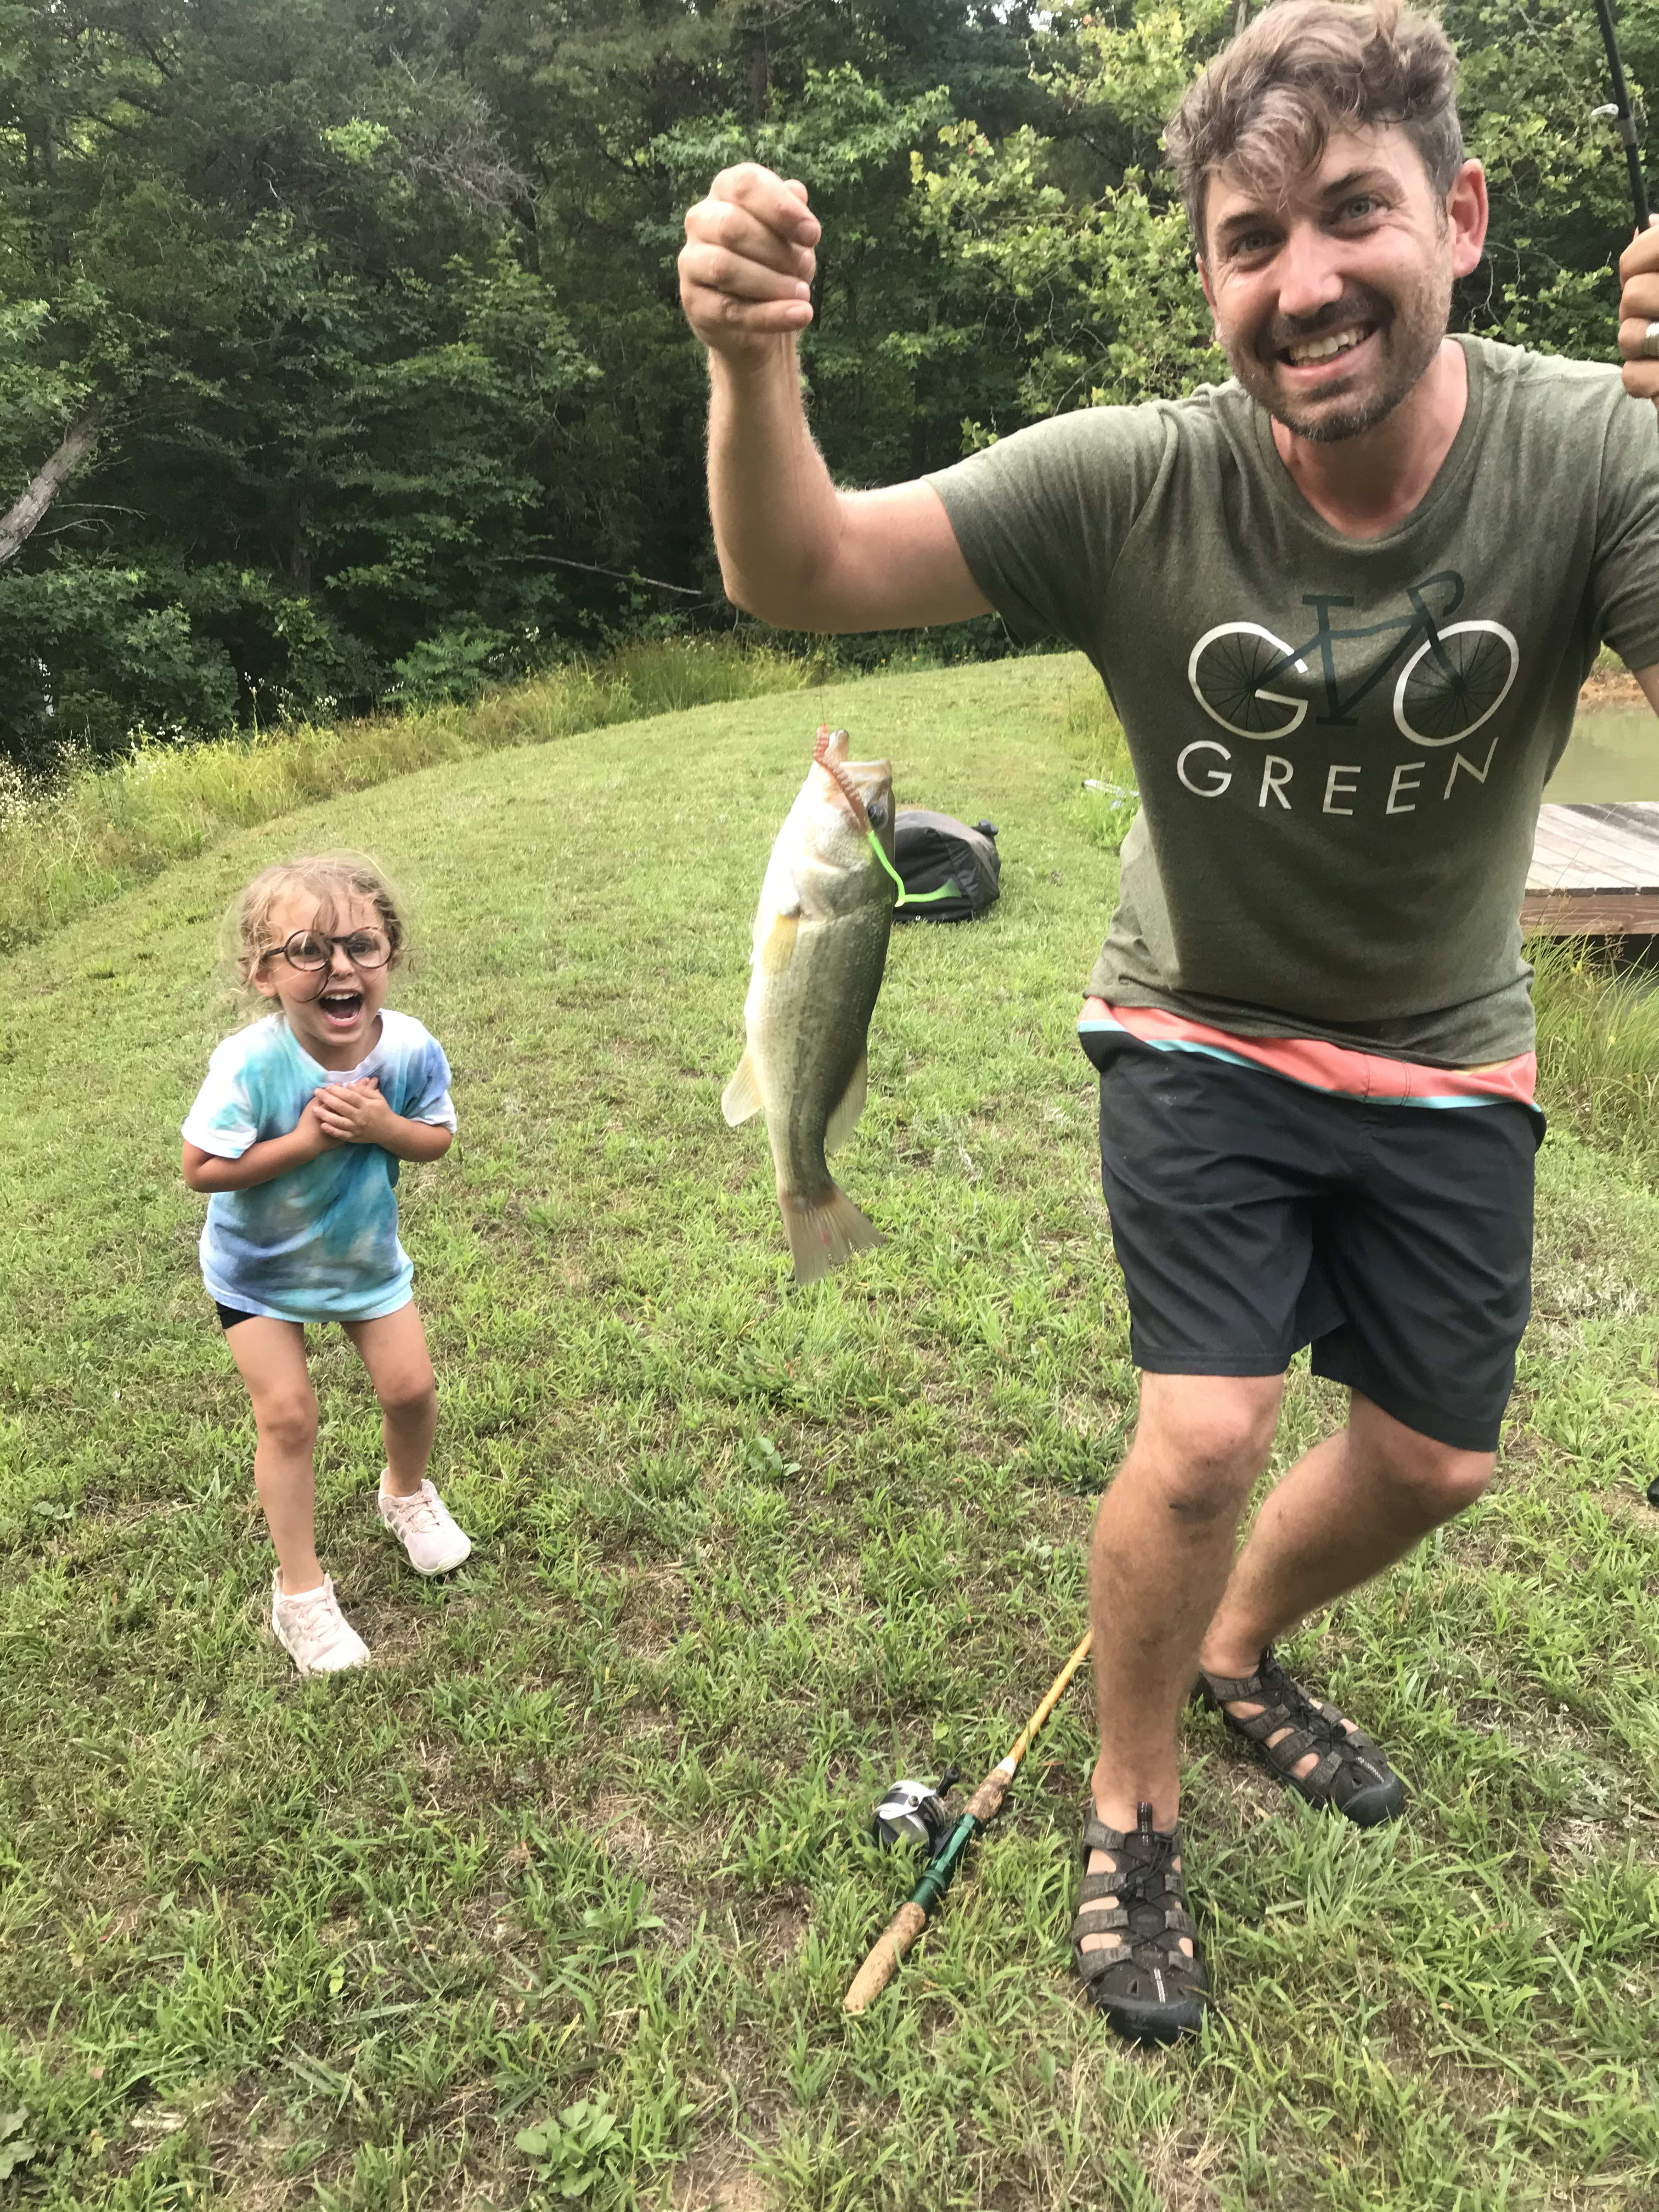 There are some BIG fish to catch in the pond!